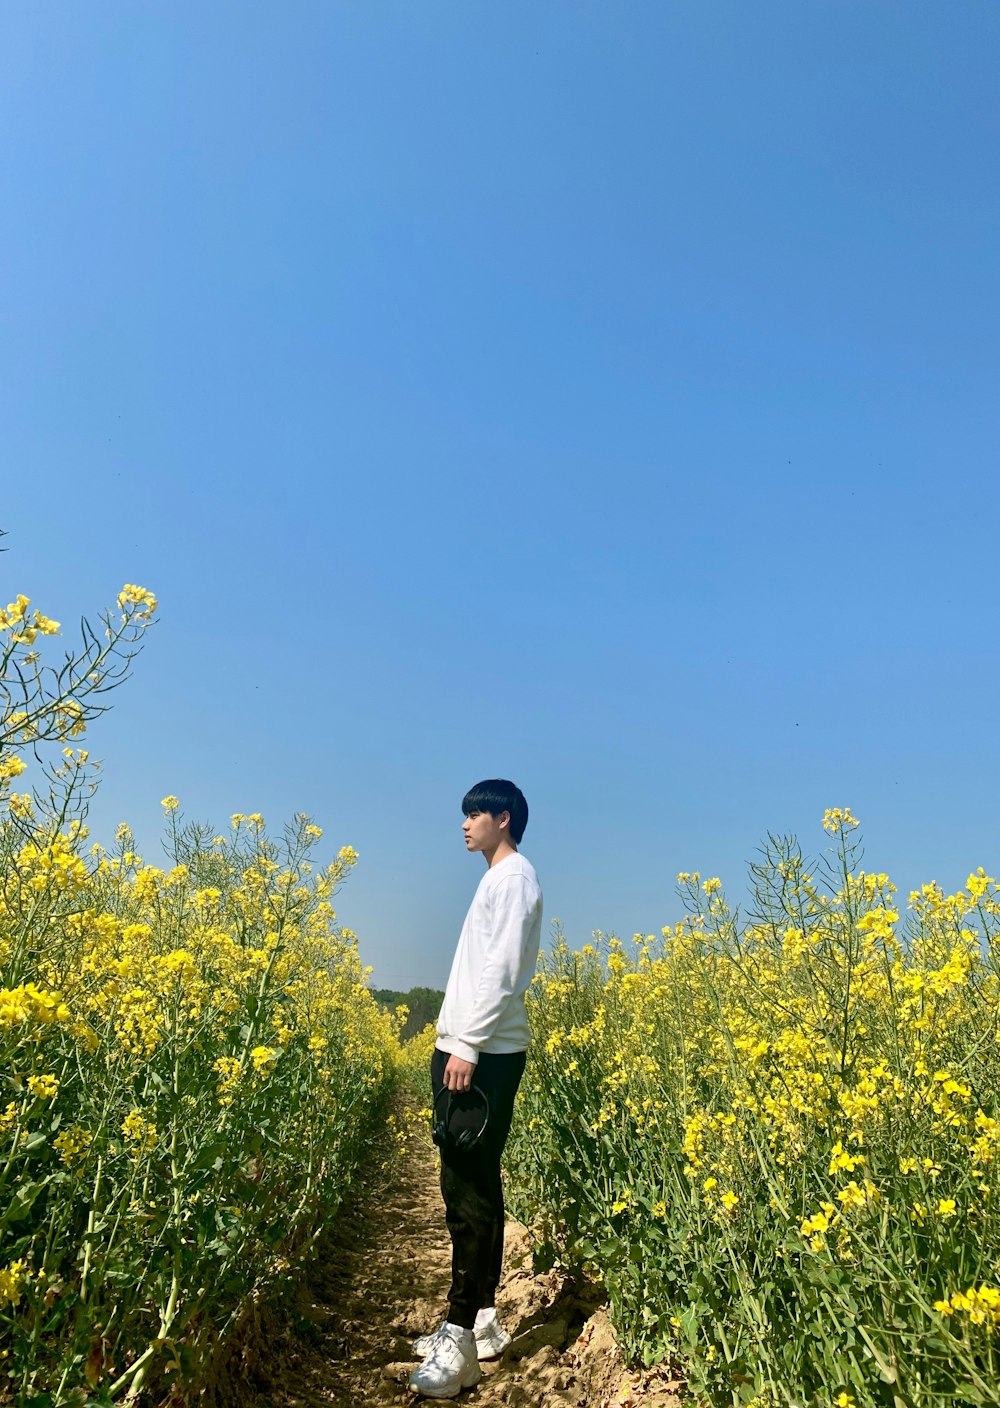 man in white shirt and black pants standing on yellow flower field during daytime